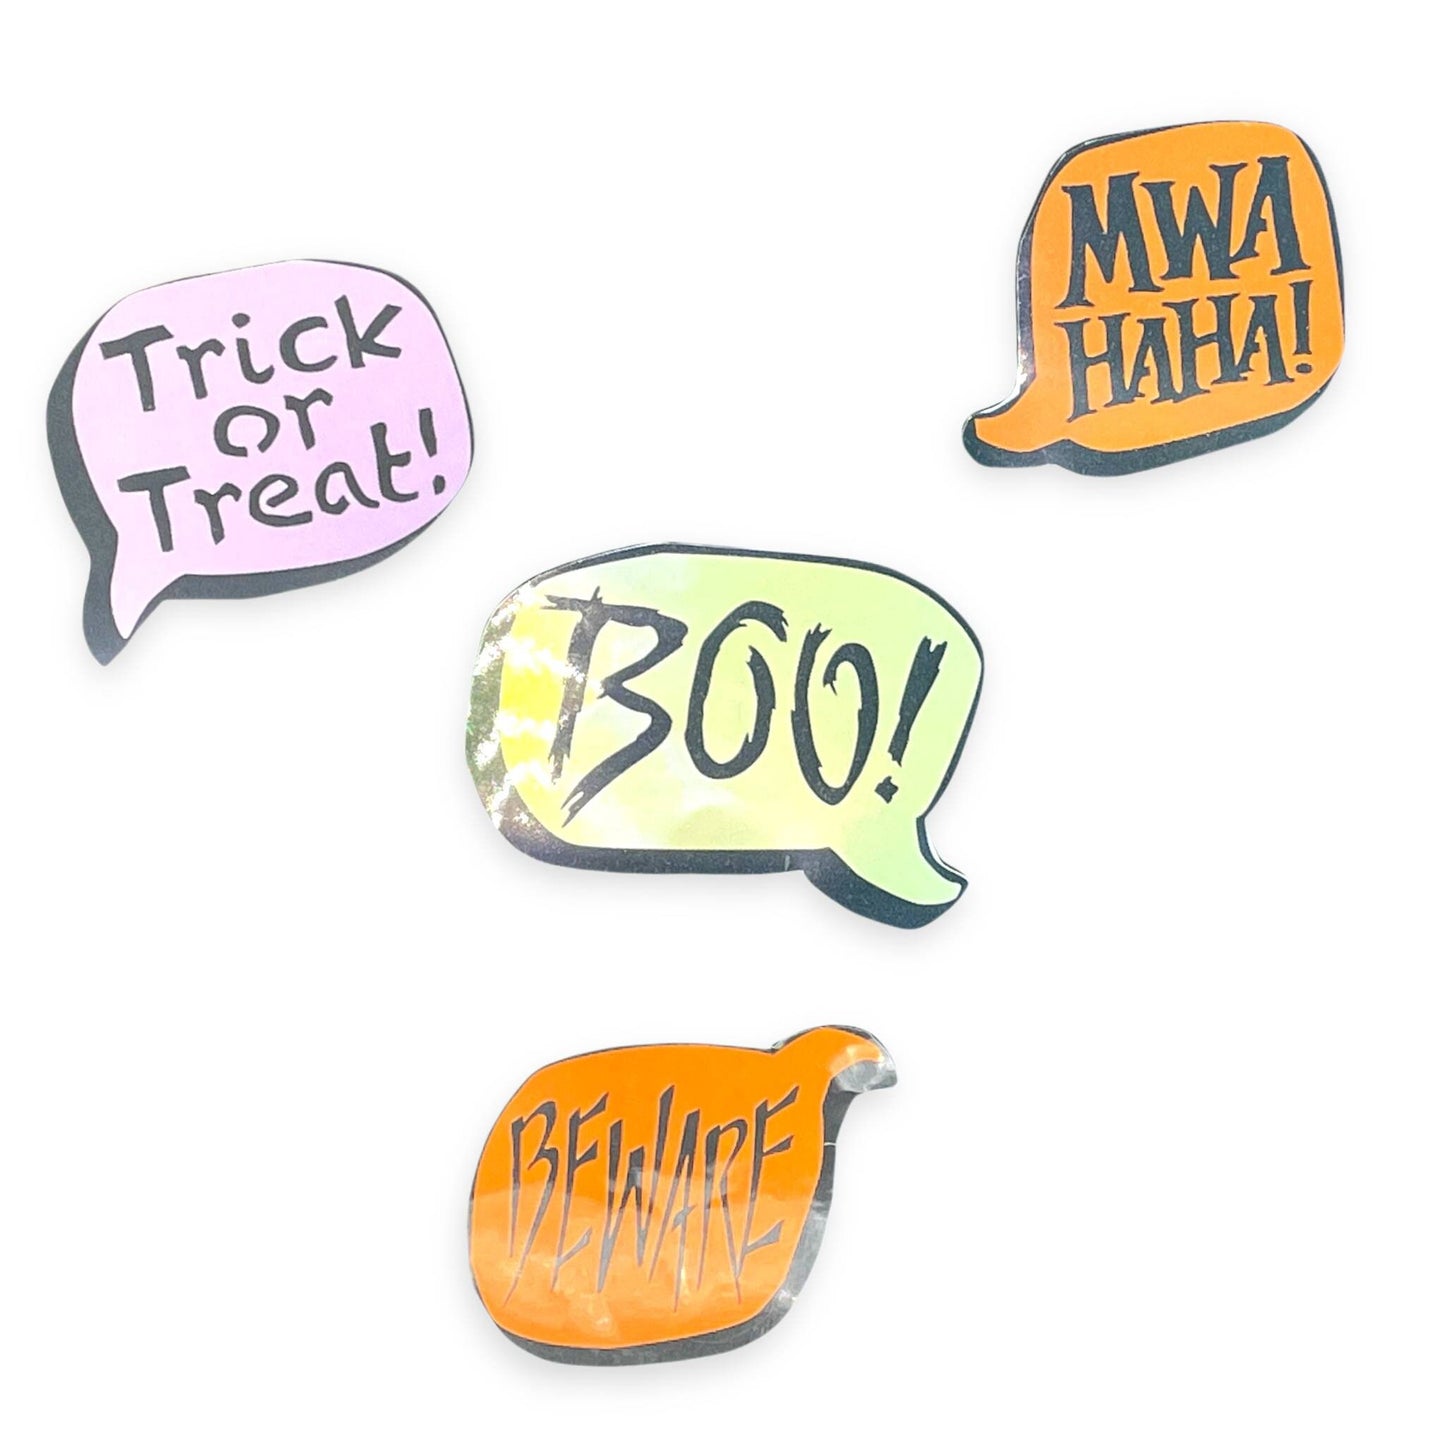 Stickers, Large Halloween comment stickers, Large stickers, Sticker set, Water Bottle stickers, Halloween sticker, Laptop decals